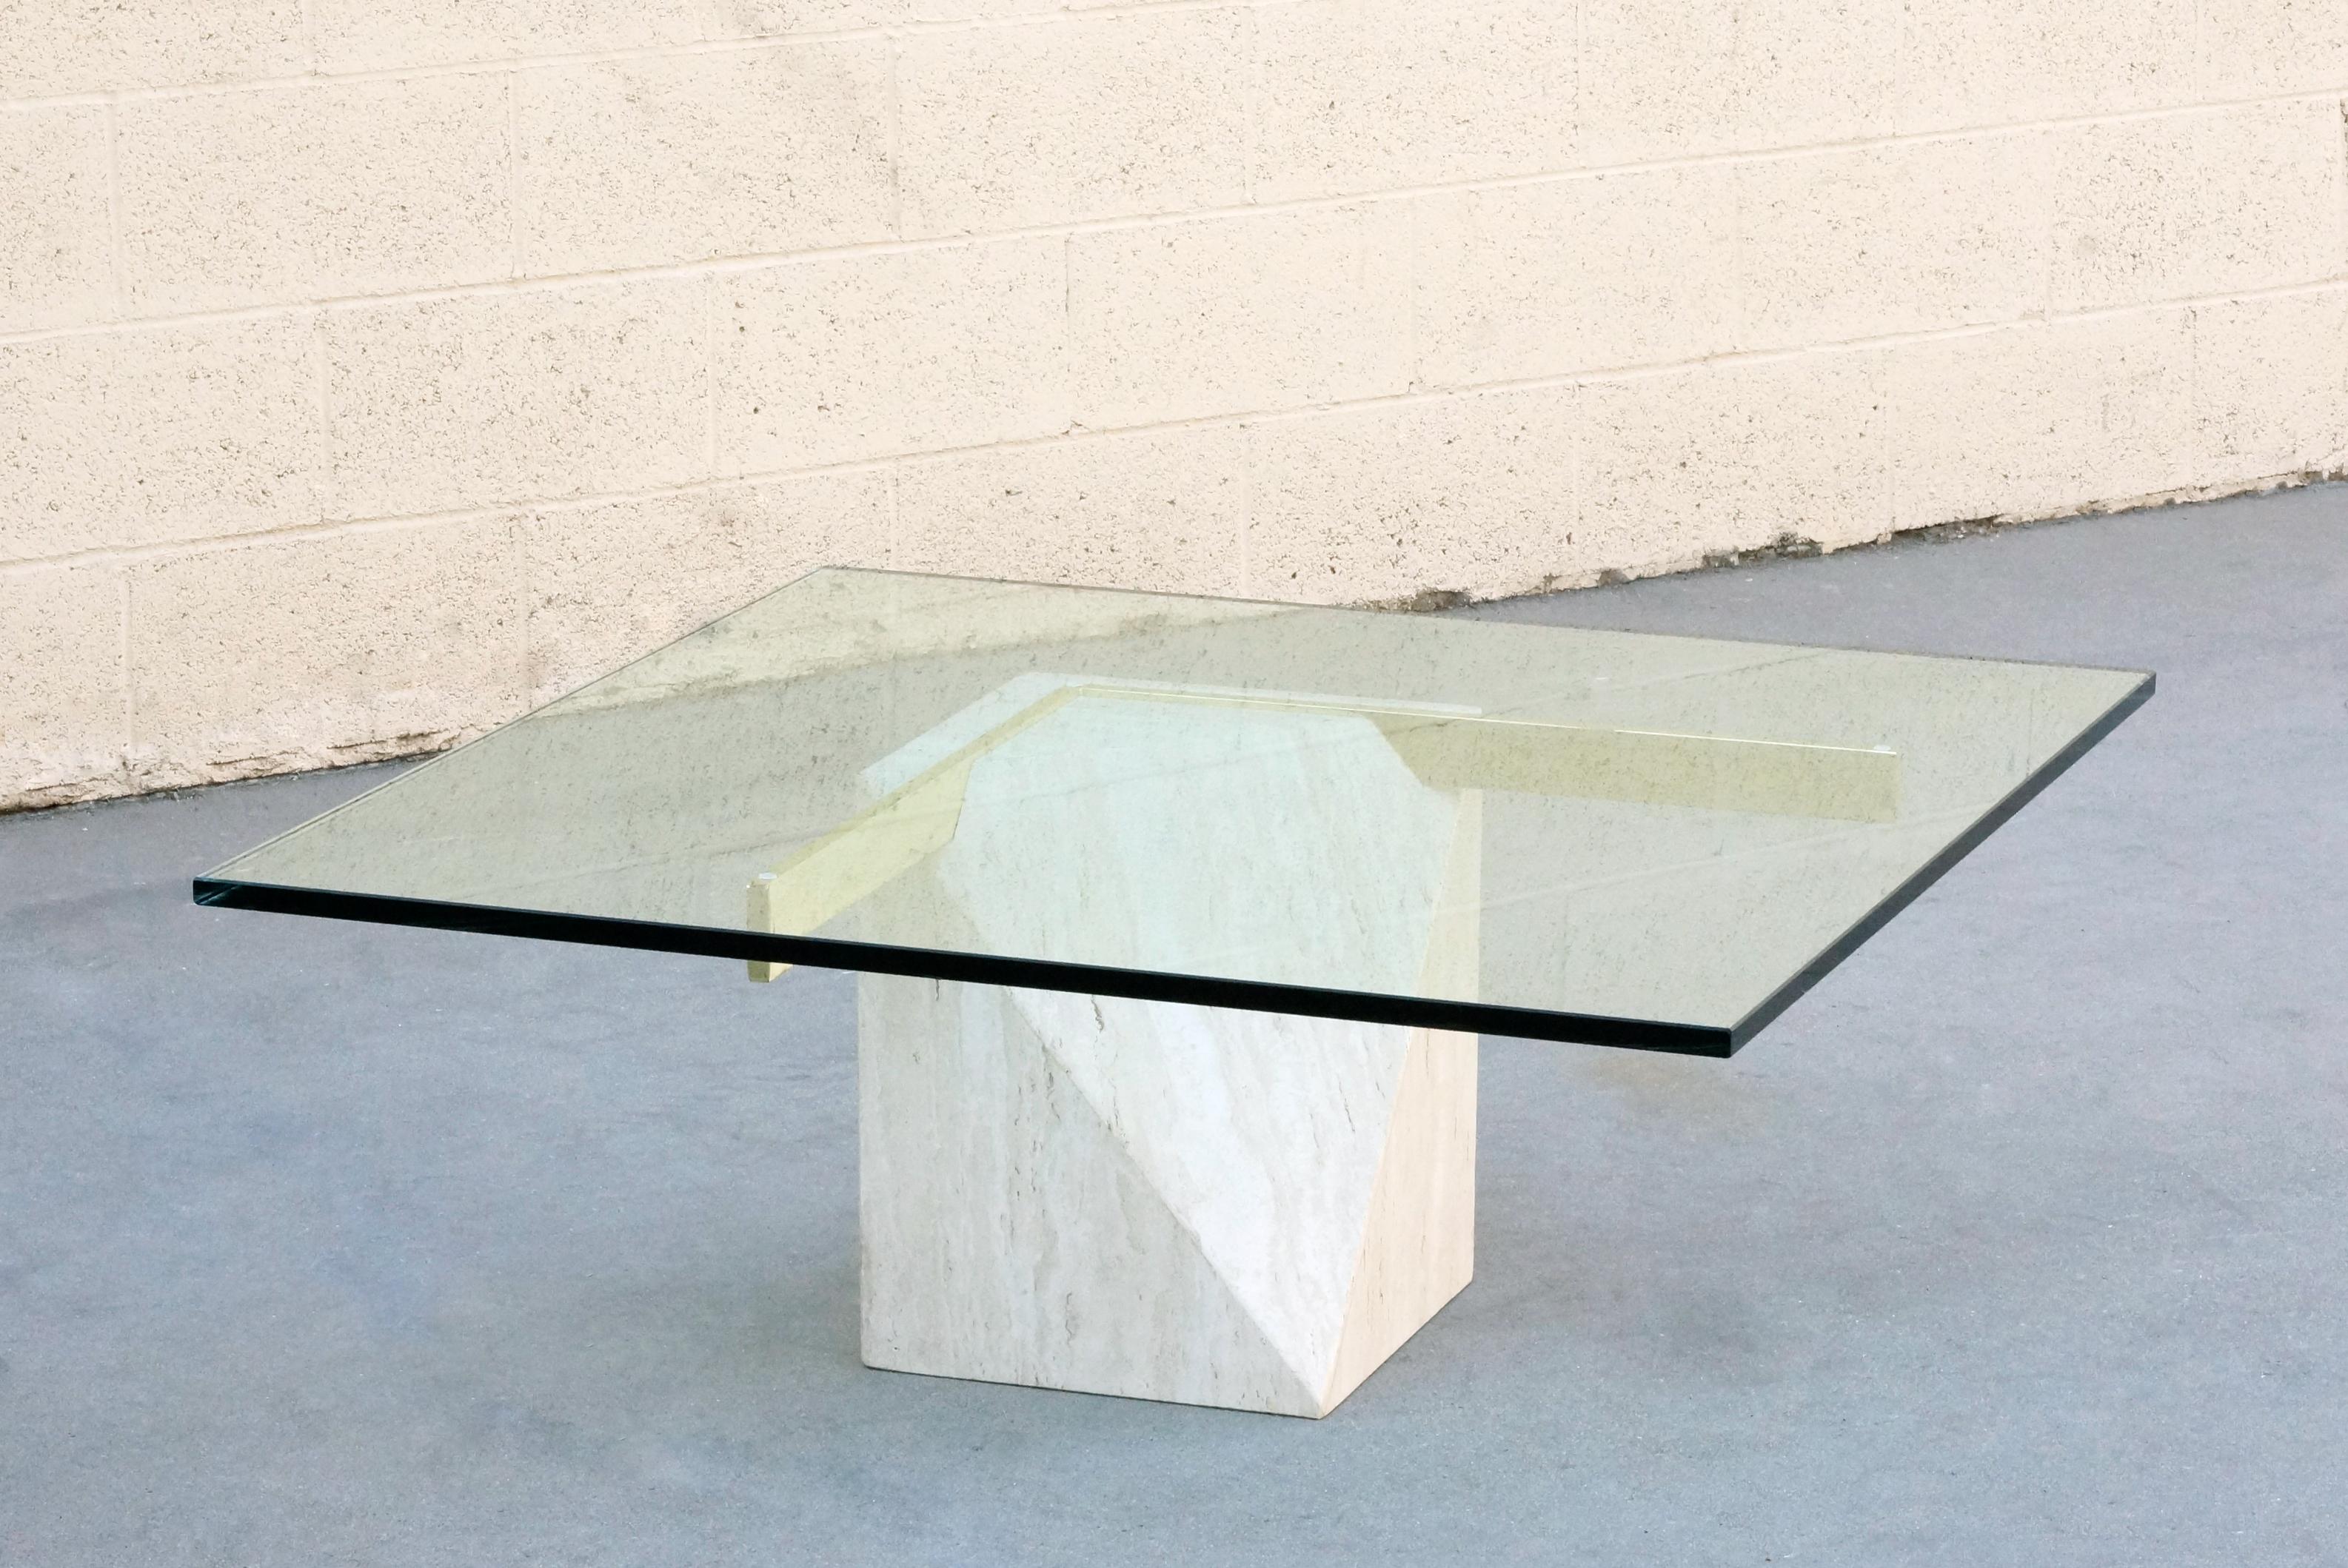 Classic 1970s Italian travertine and brass coffee table by Artedi. Thoughtfully designed geometric base with cantilevered glass top. 

Dimensions: 40